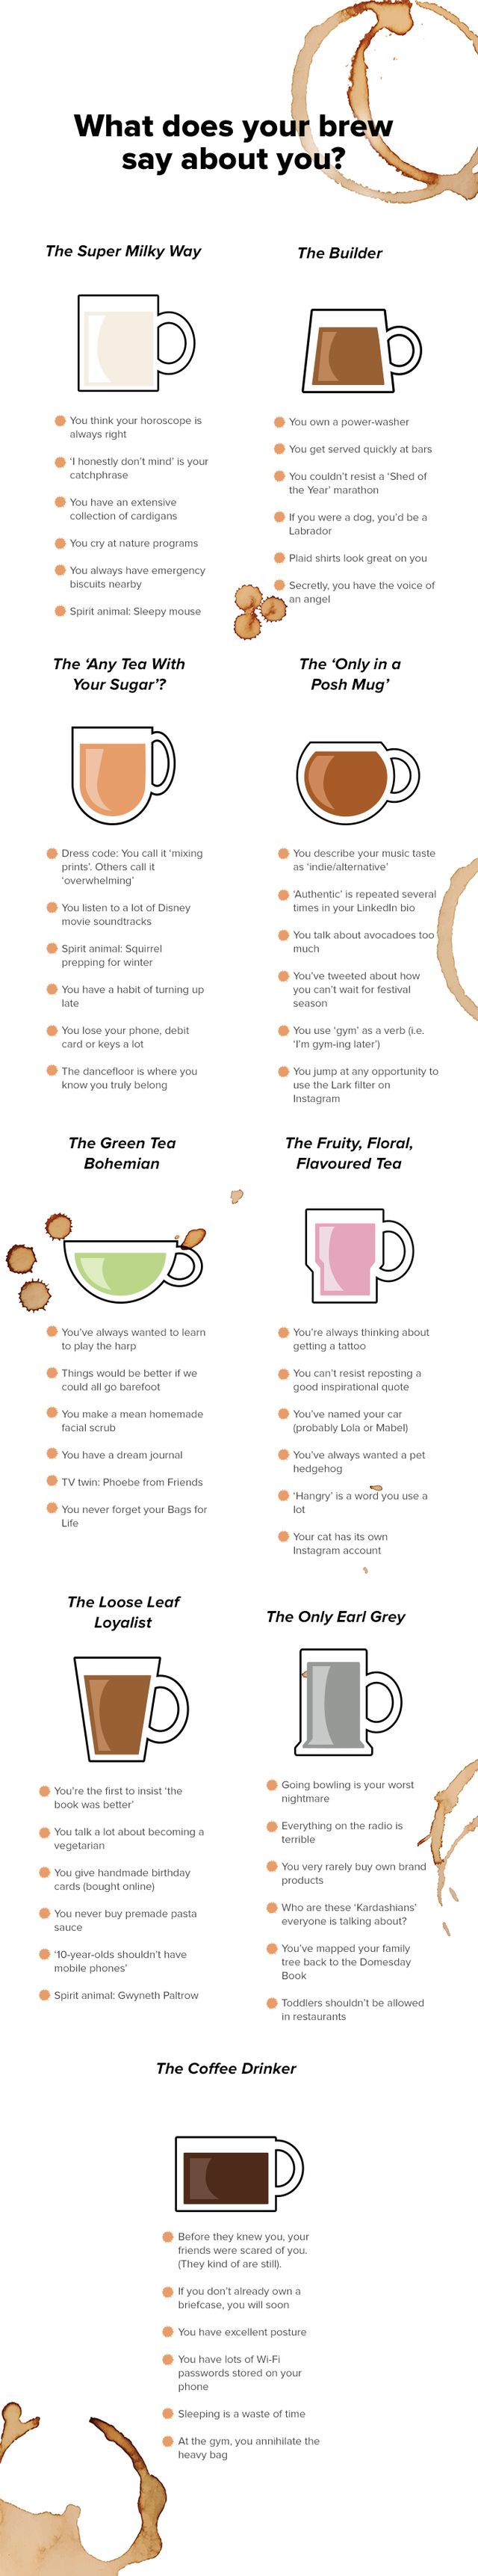 National Tea Day - what does your brew say about you?